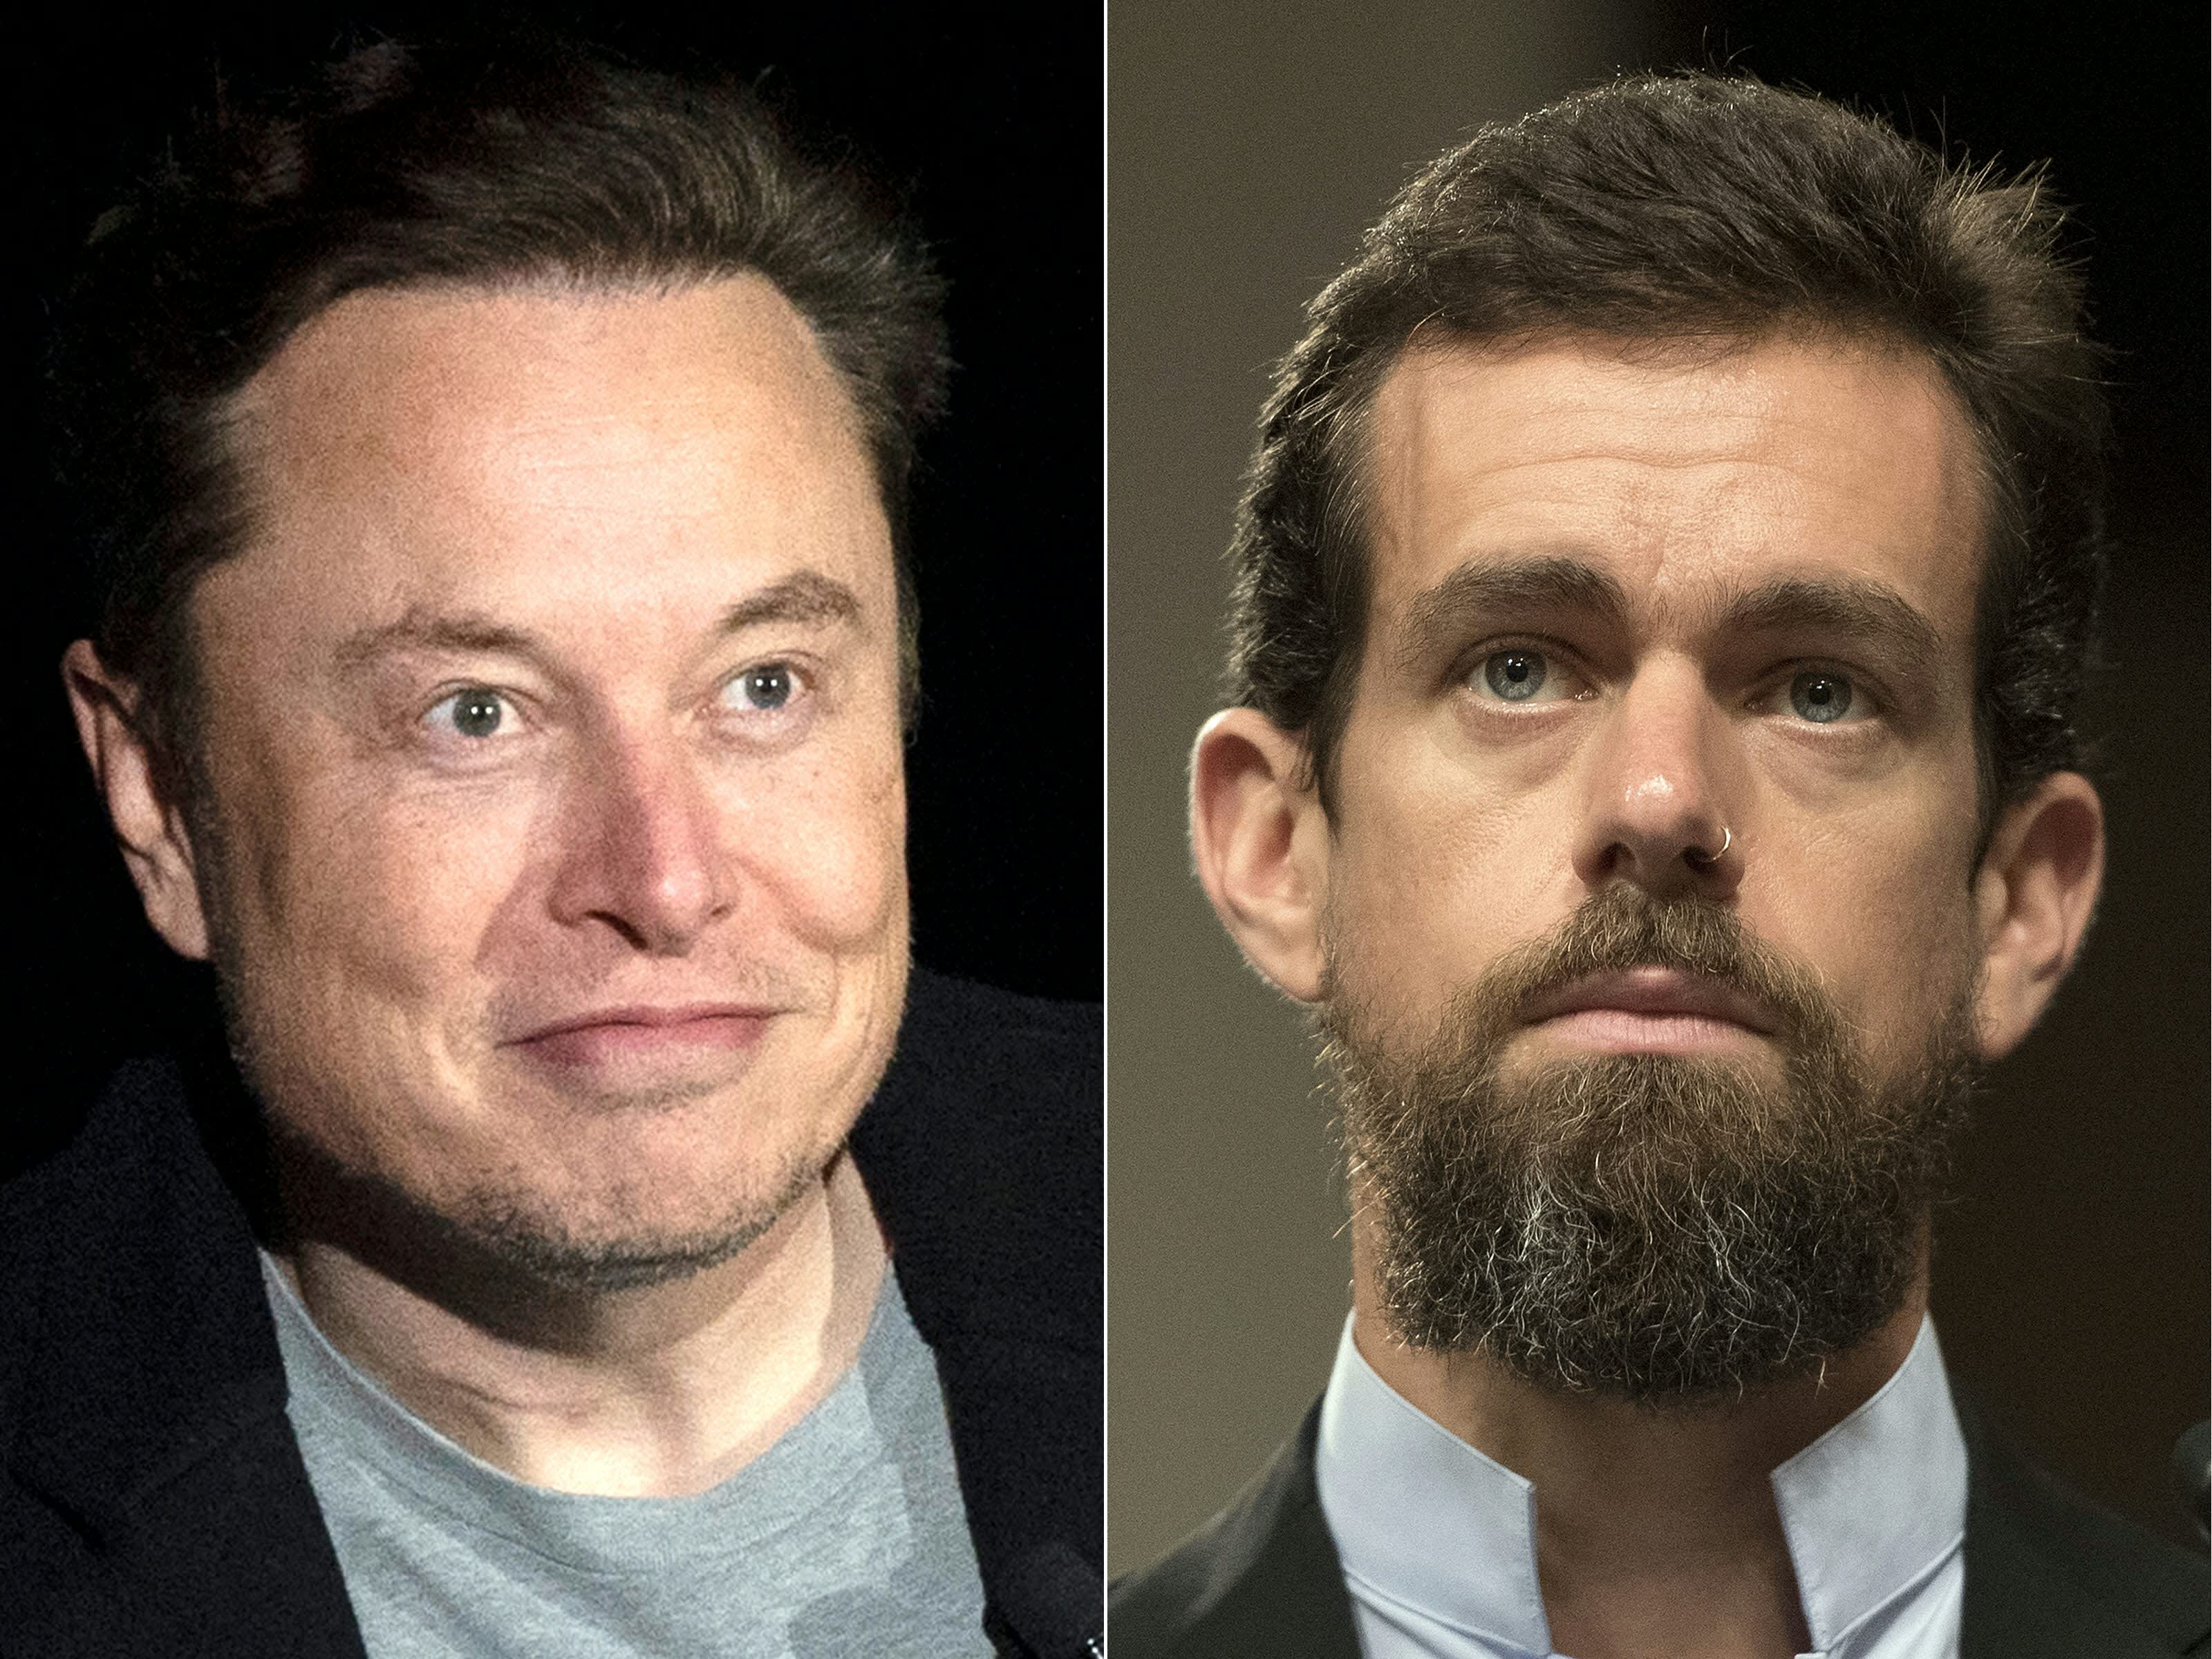 Jack Dorsey: Twitter went south after Elon Musk bought it, he’s not the best person to run it